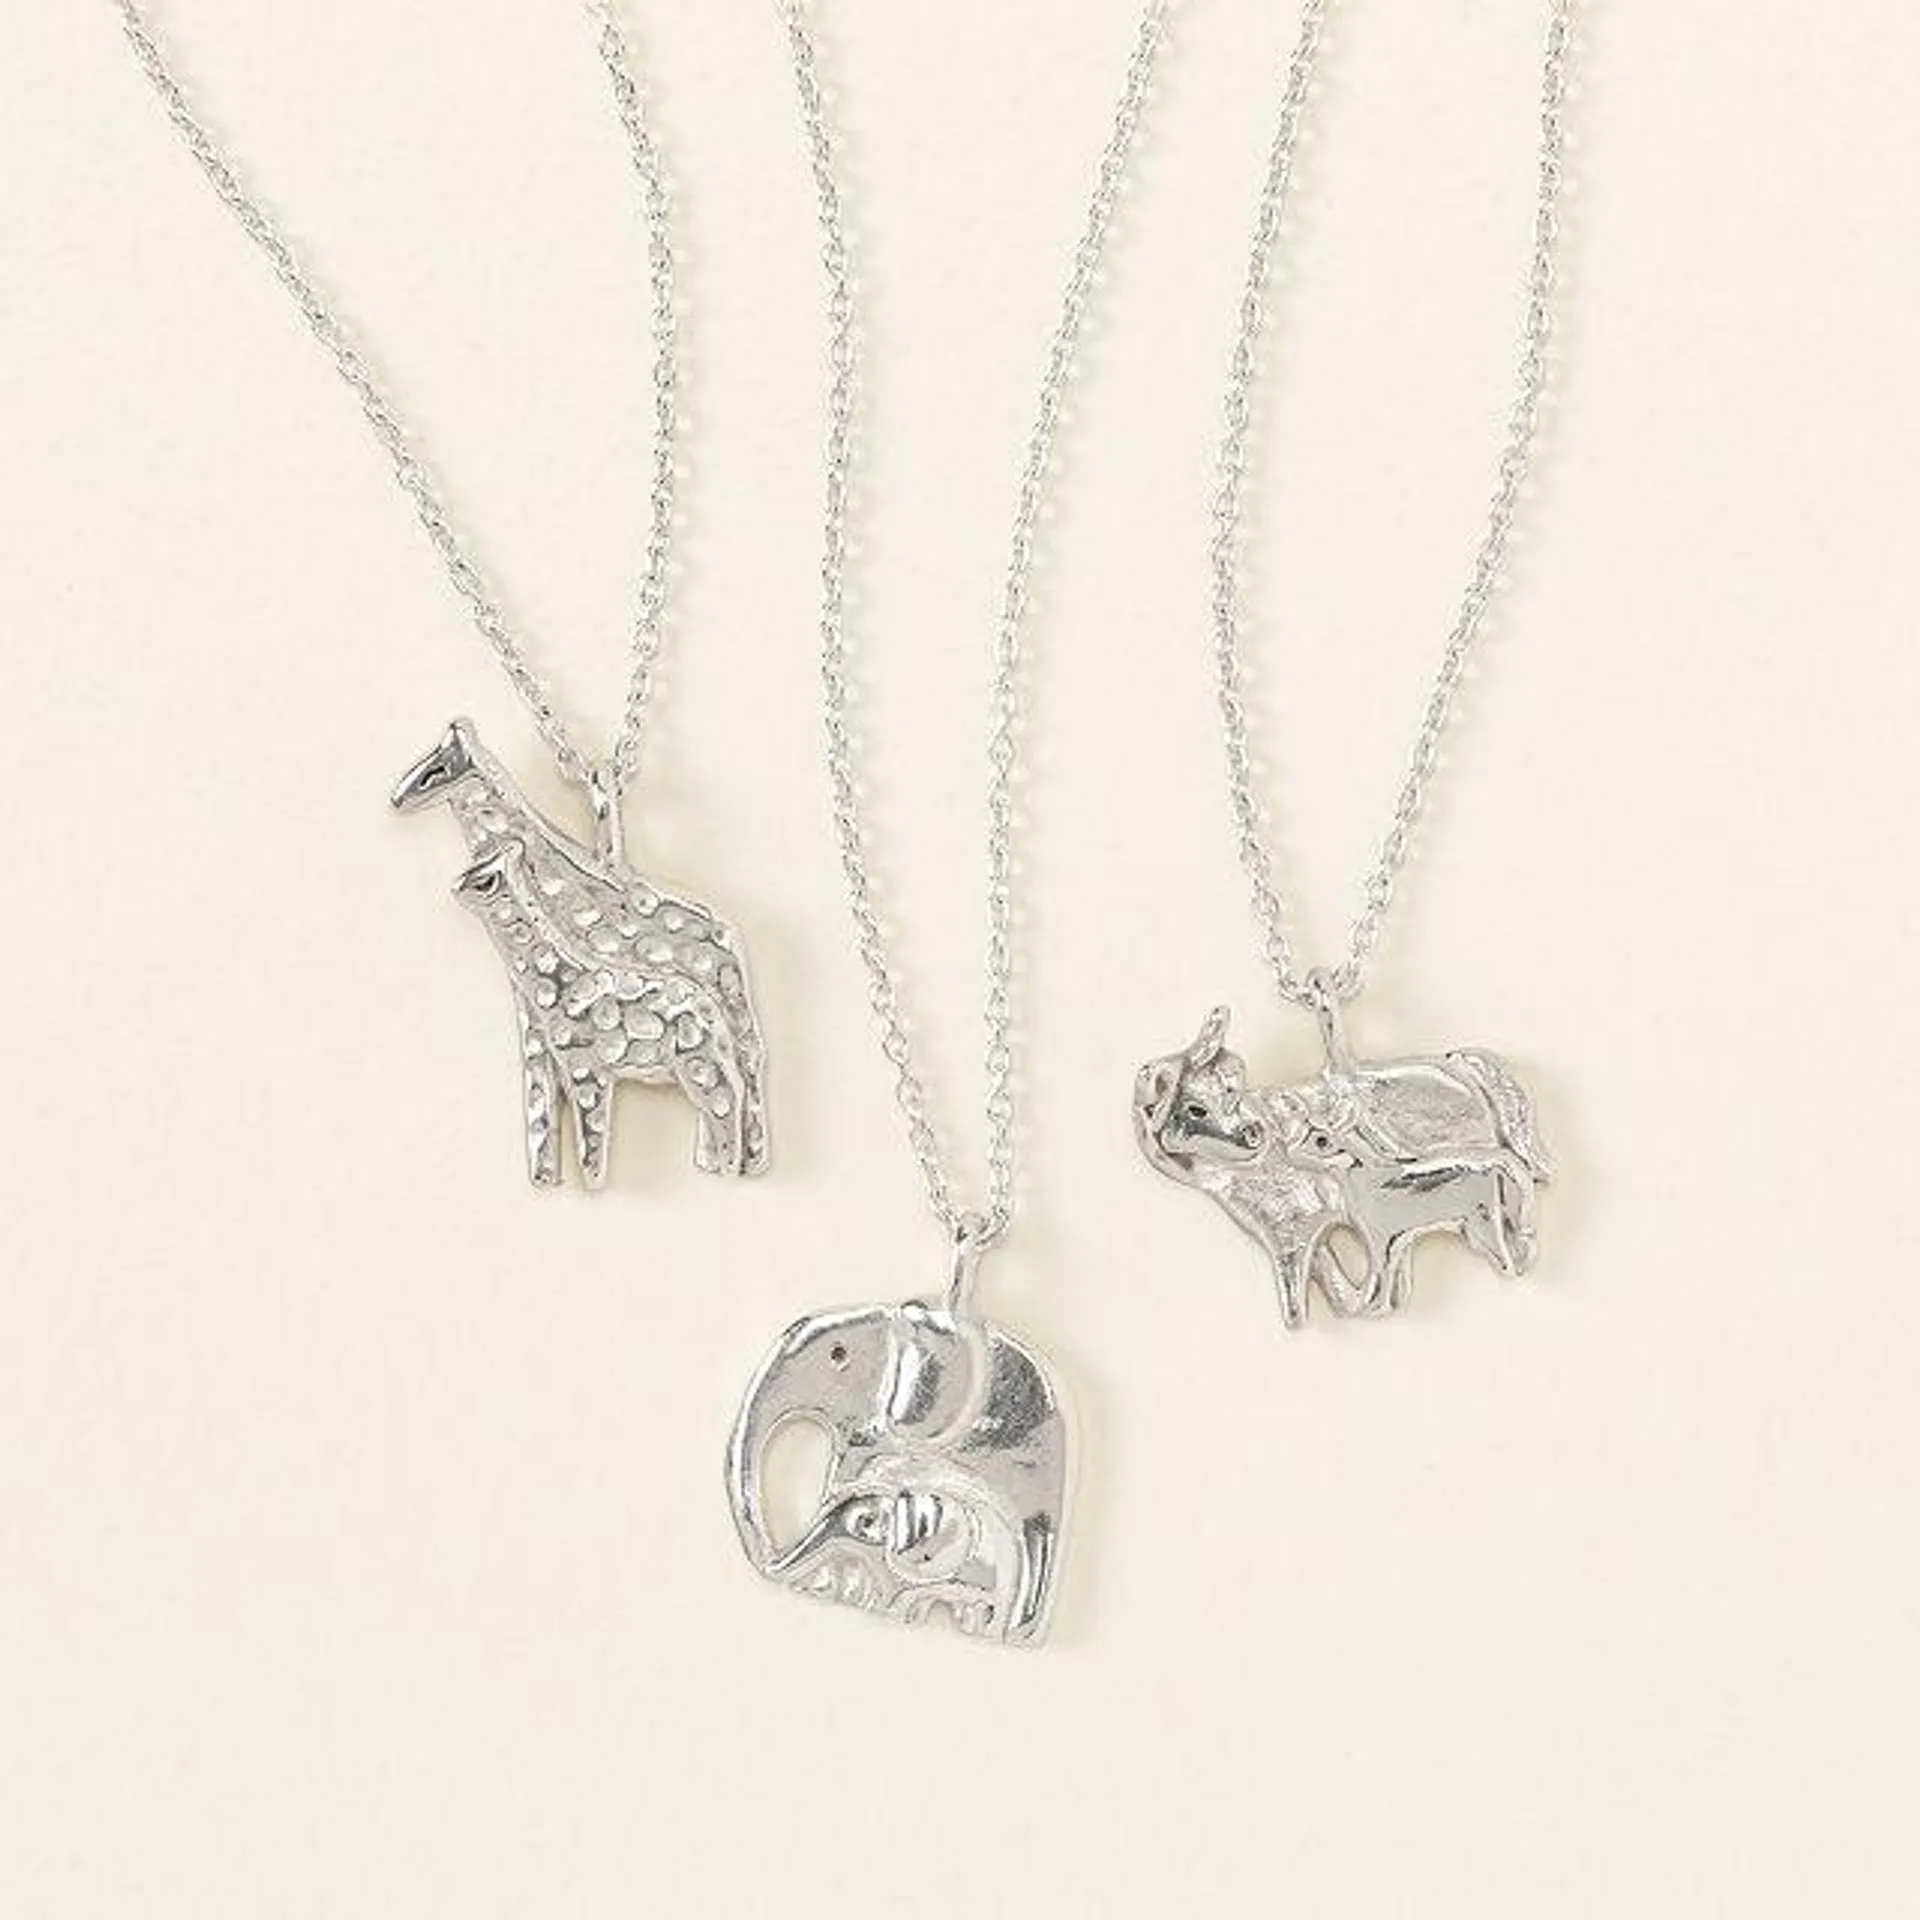 You & Me Animal Necklace